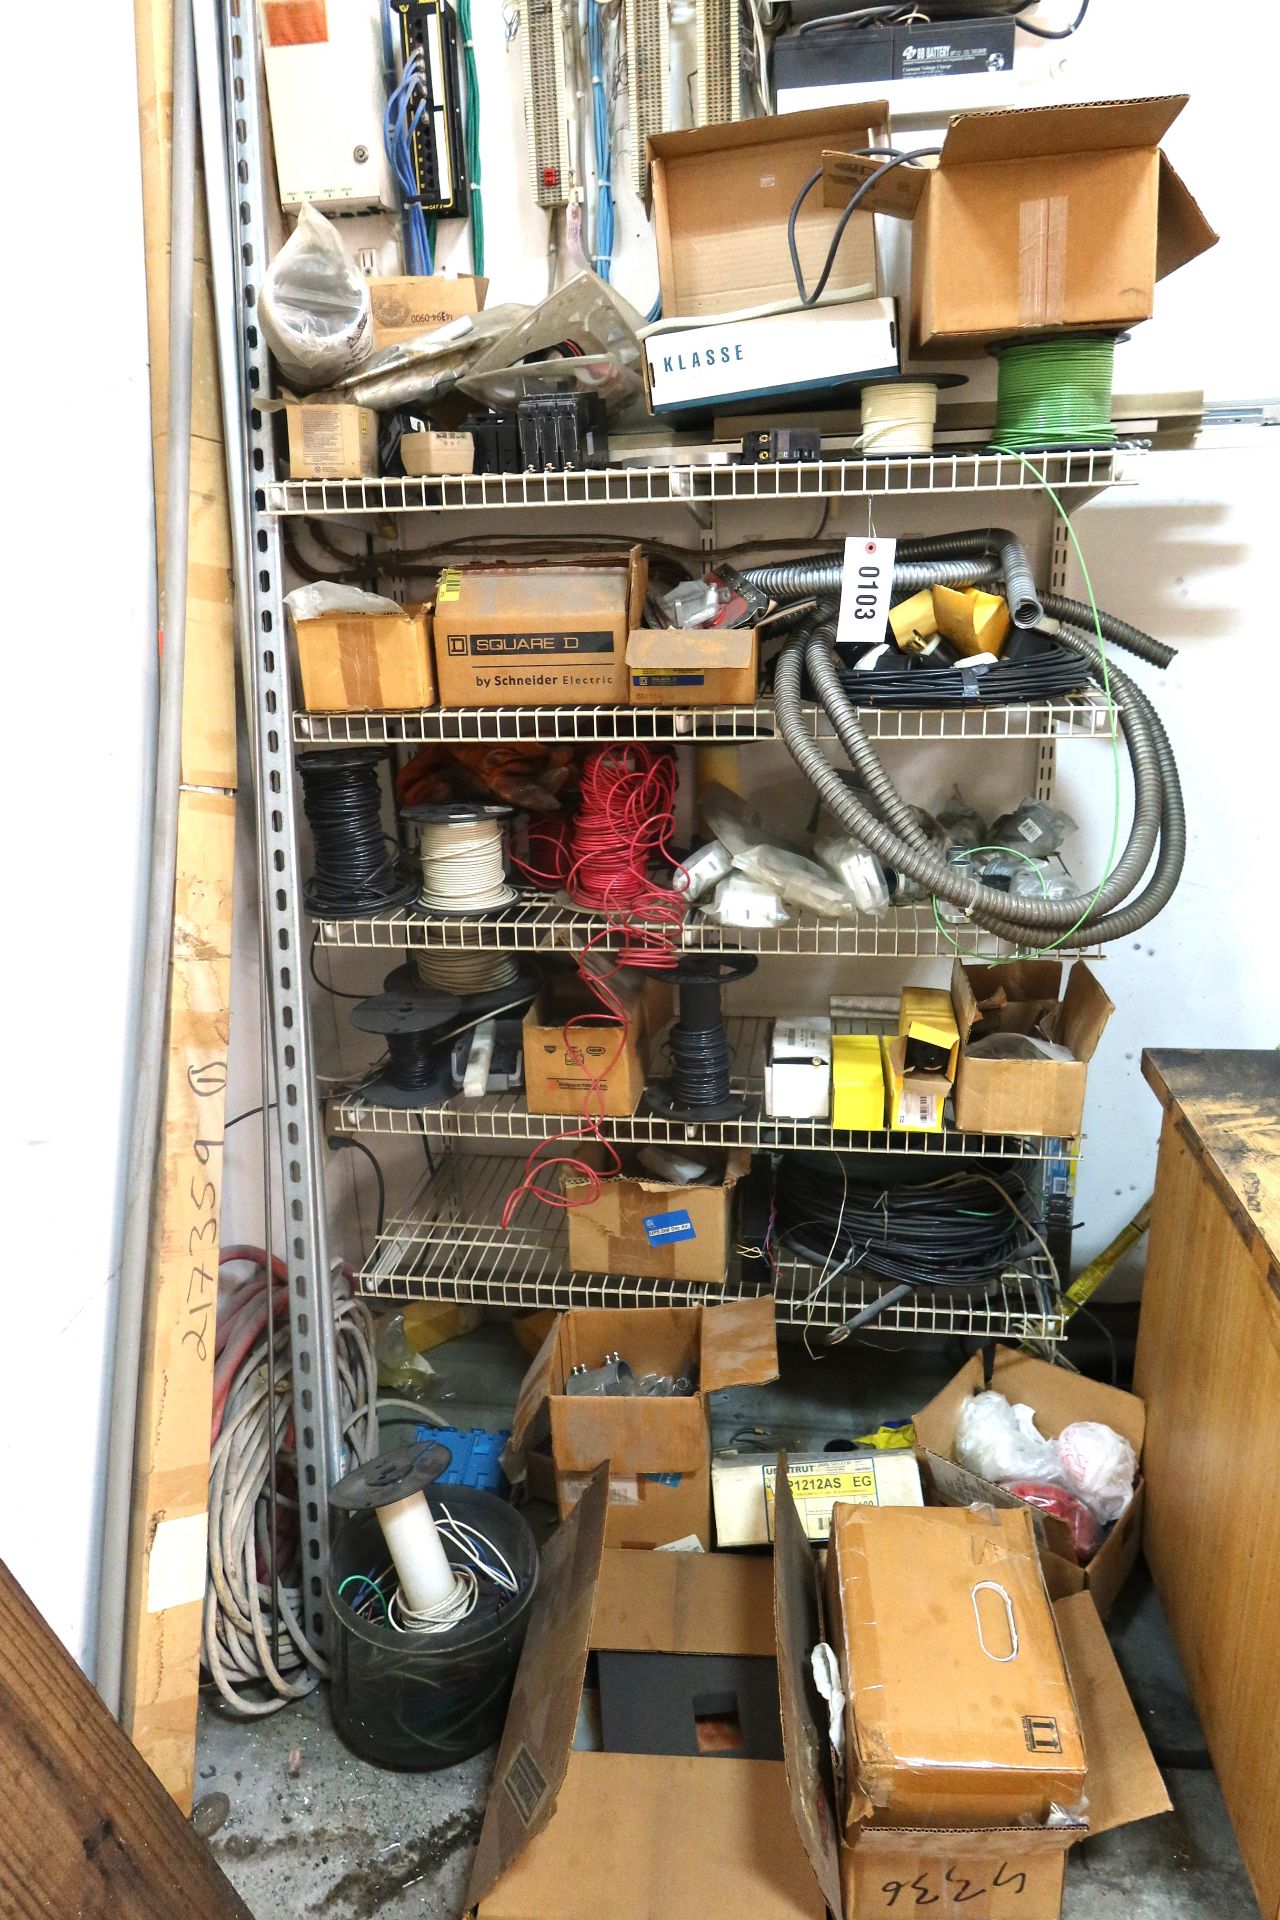 Rack of Electric Supplies, Plumping Supplies, and Wiring